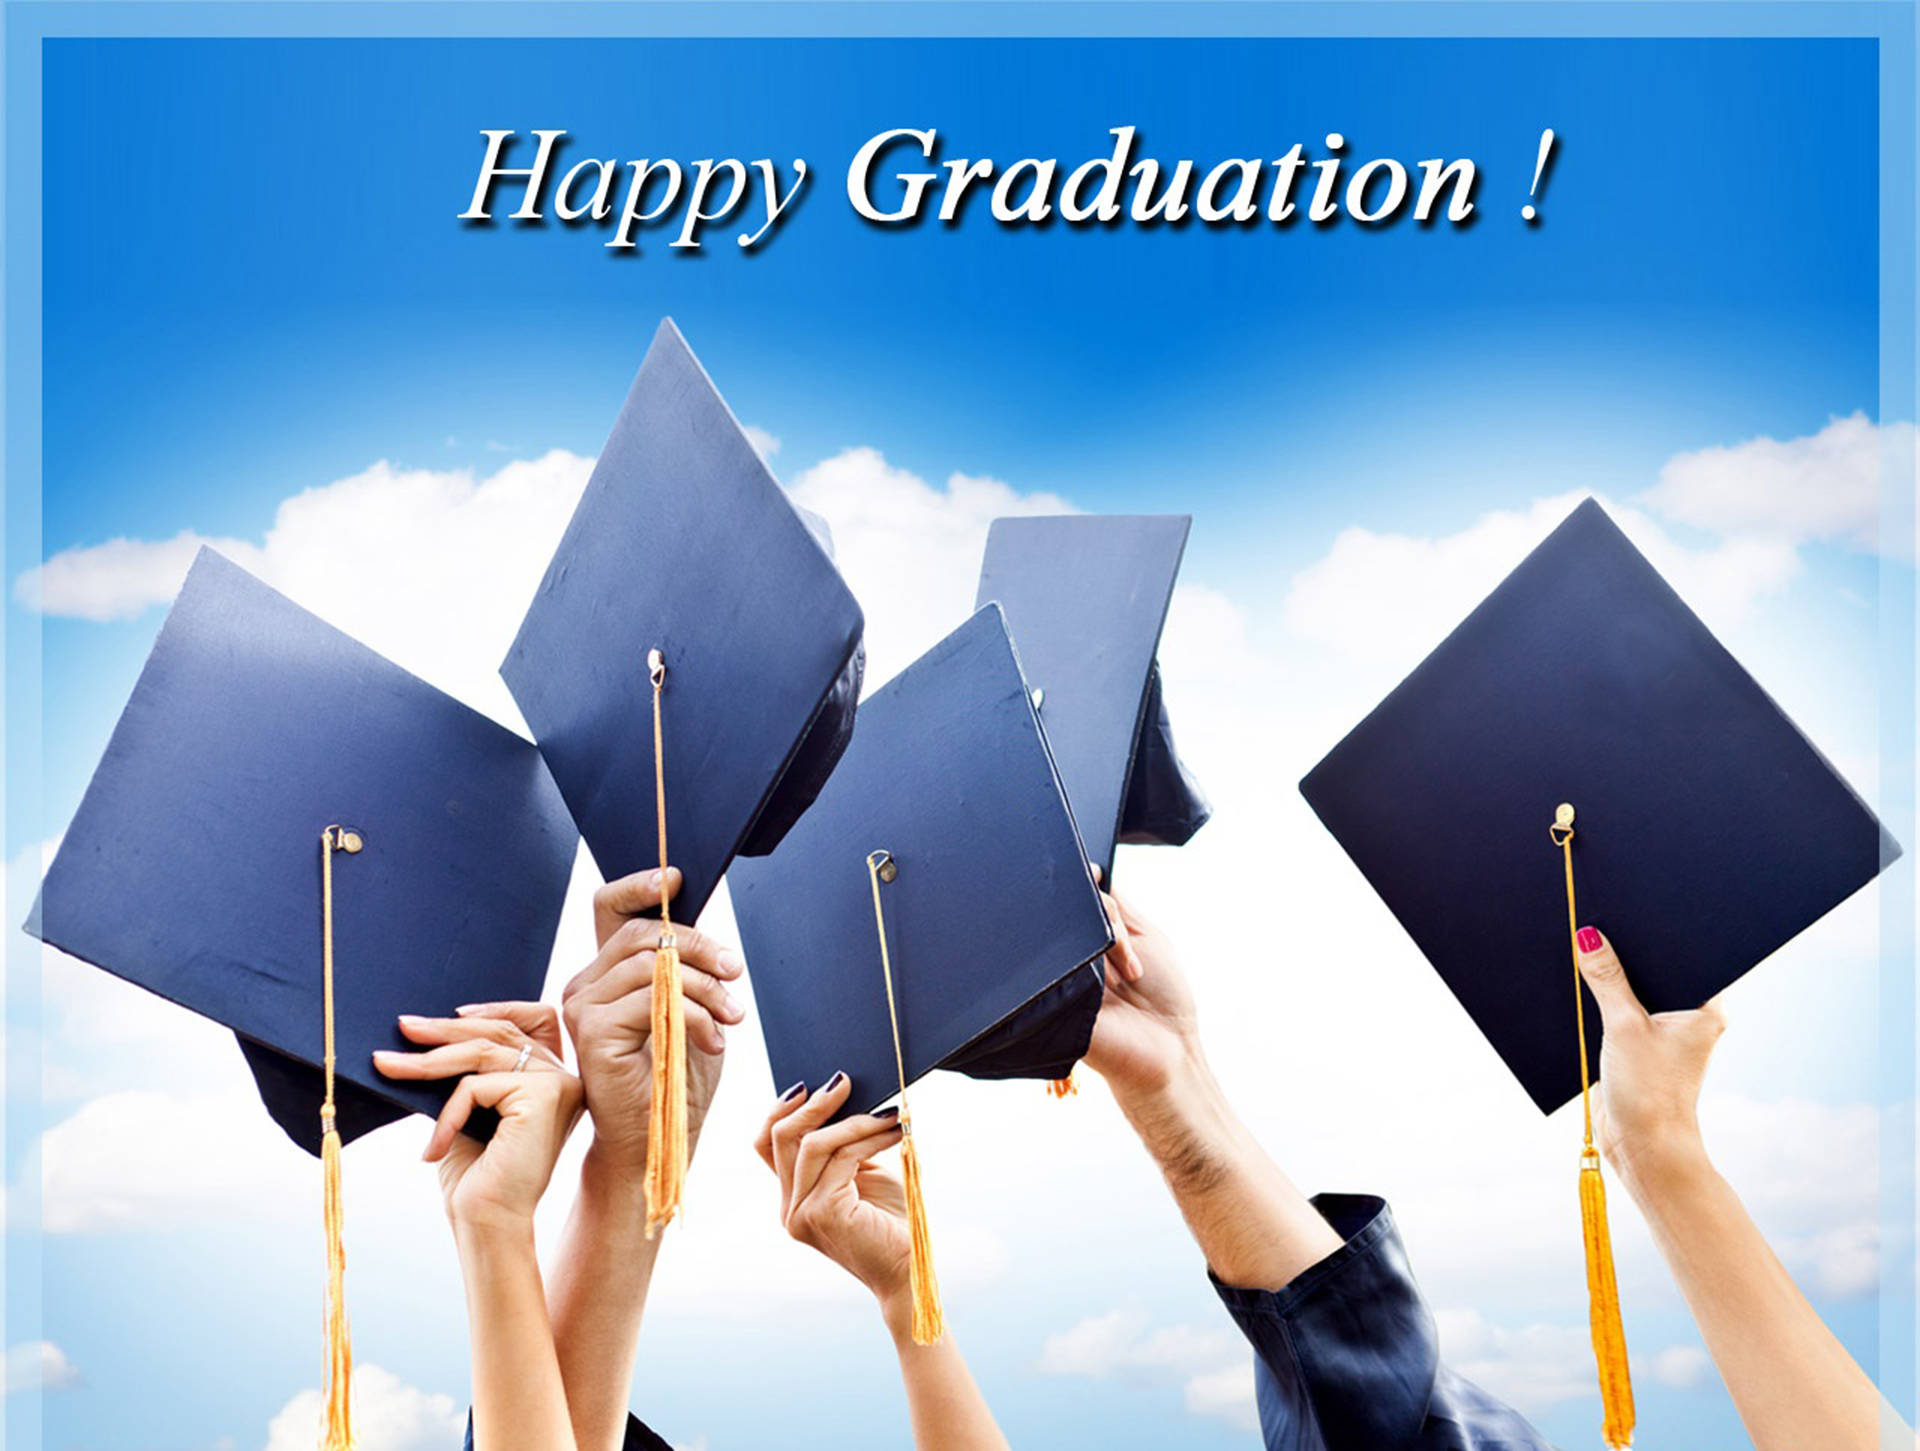 Graduation Greeting With Mortar Boards